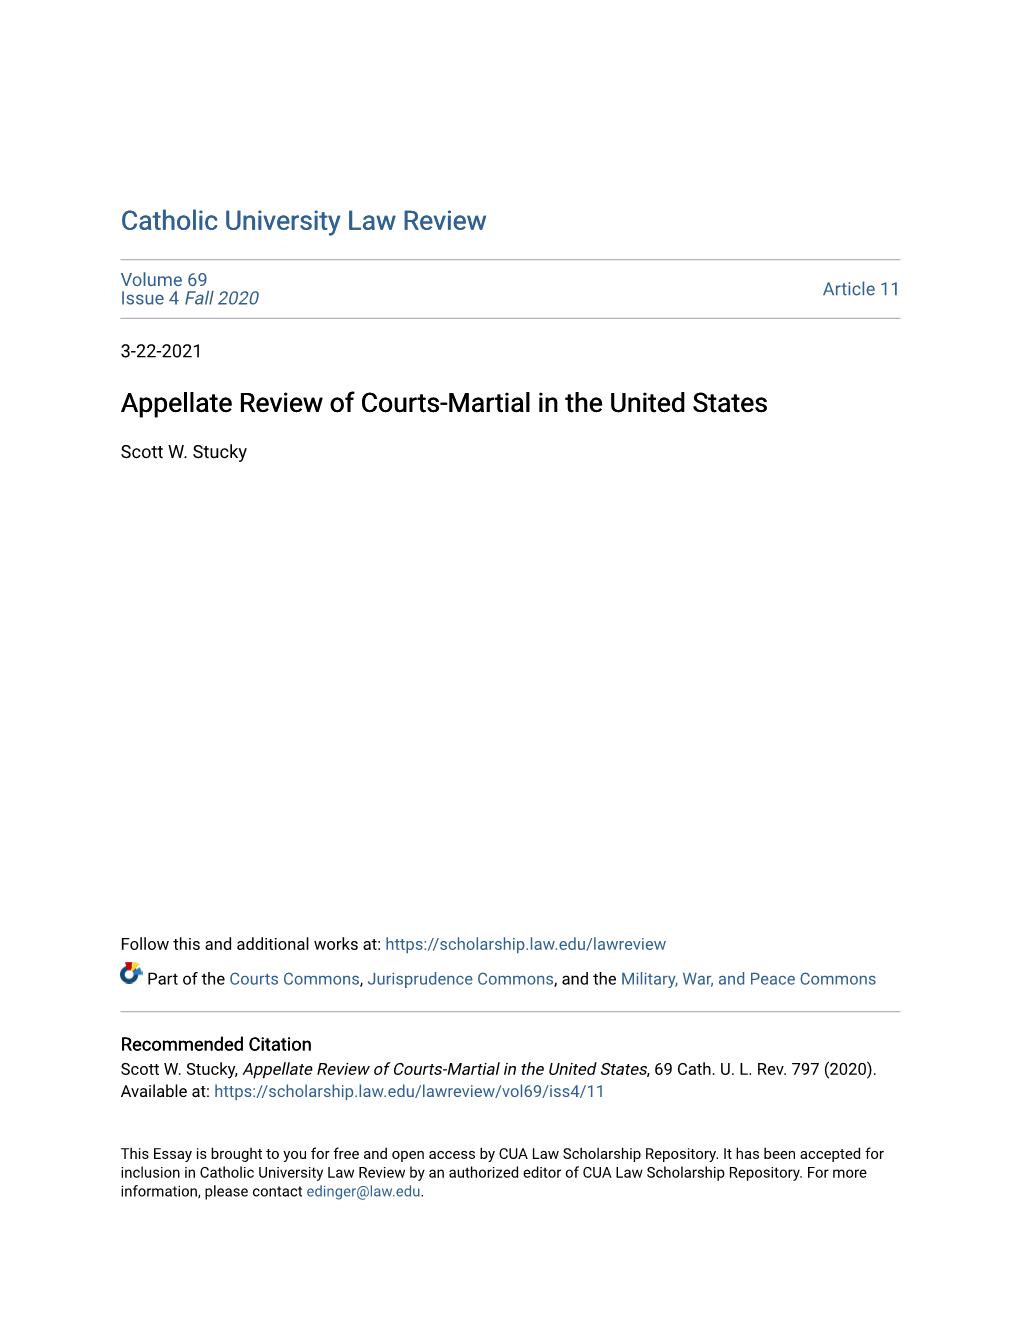 Appellate Review of Courts-Martial in the United States